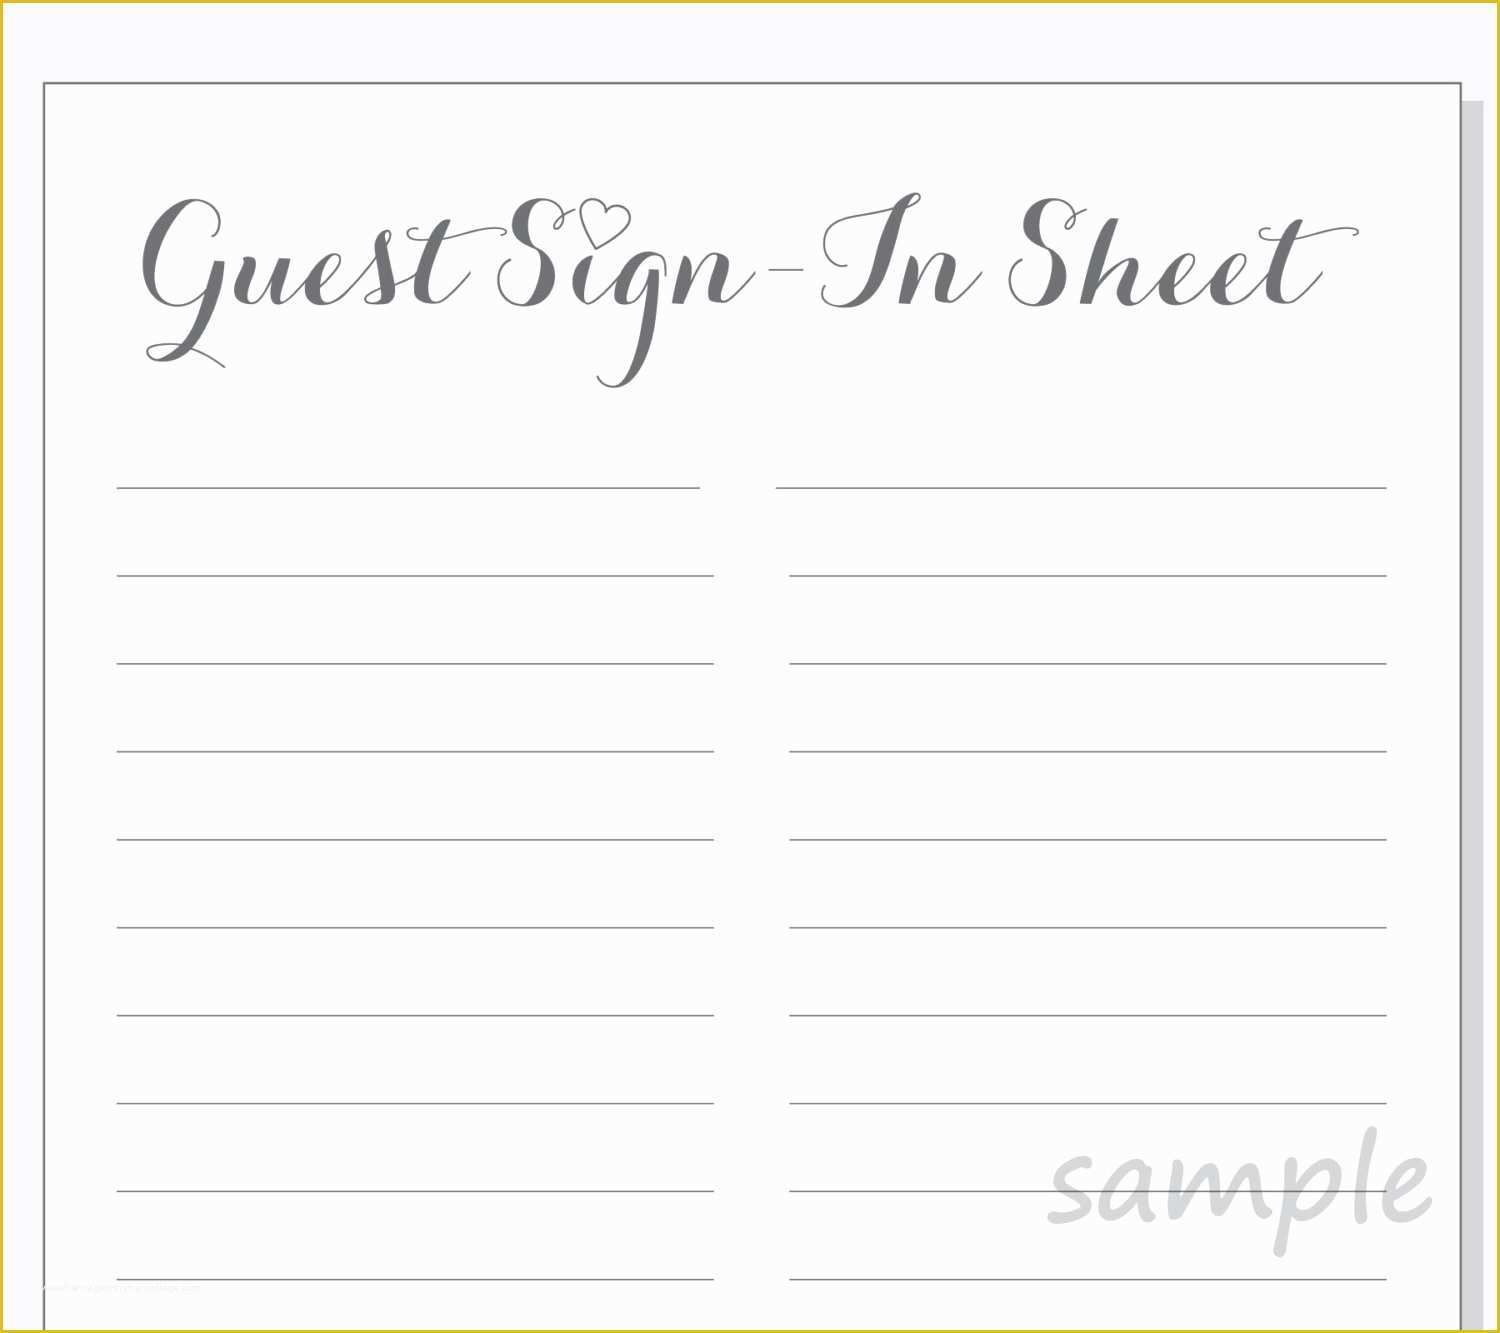 Free Wedding Sign Templates Of Diy Guest Sign In Sheet Printable for A Wedding Bridal